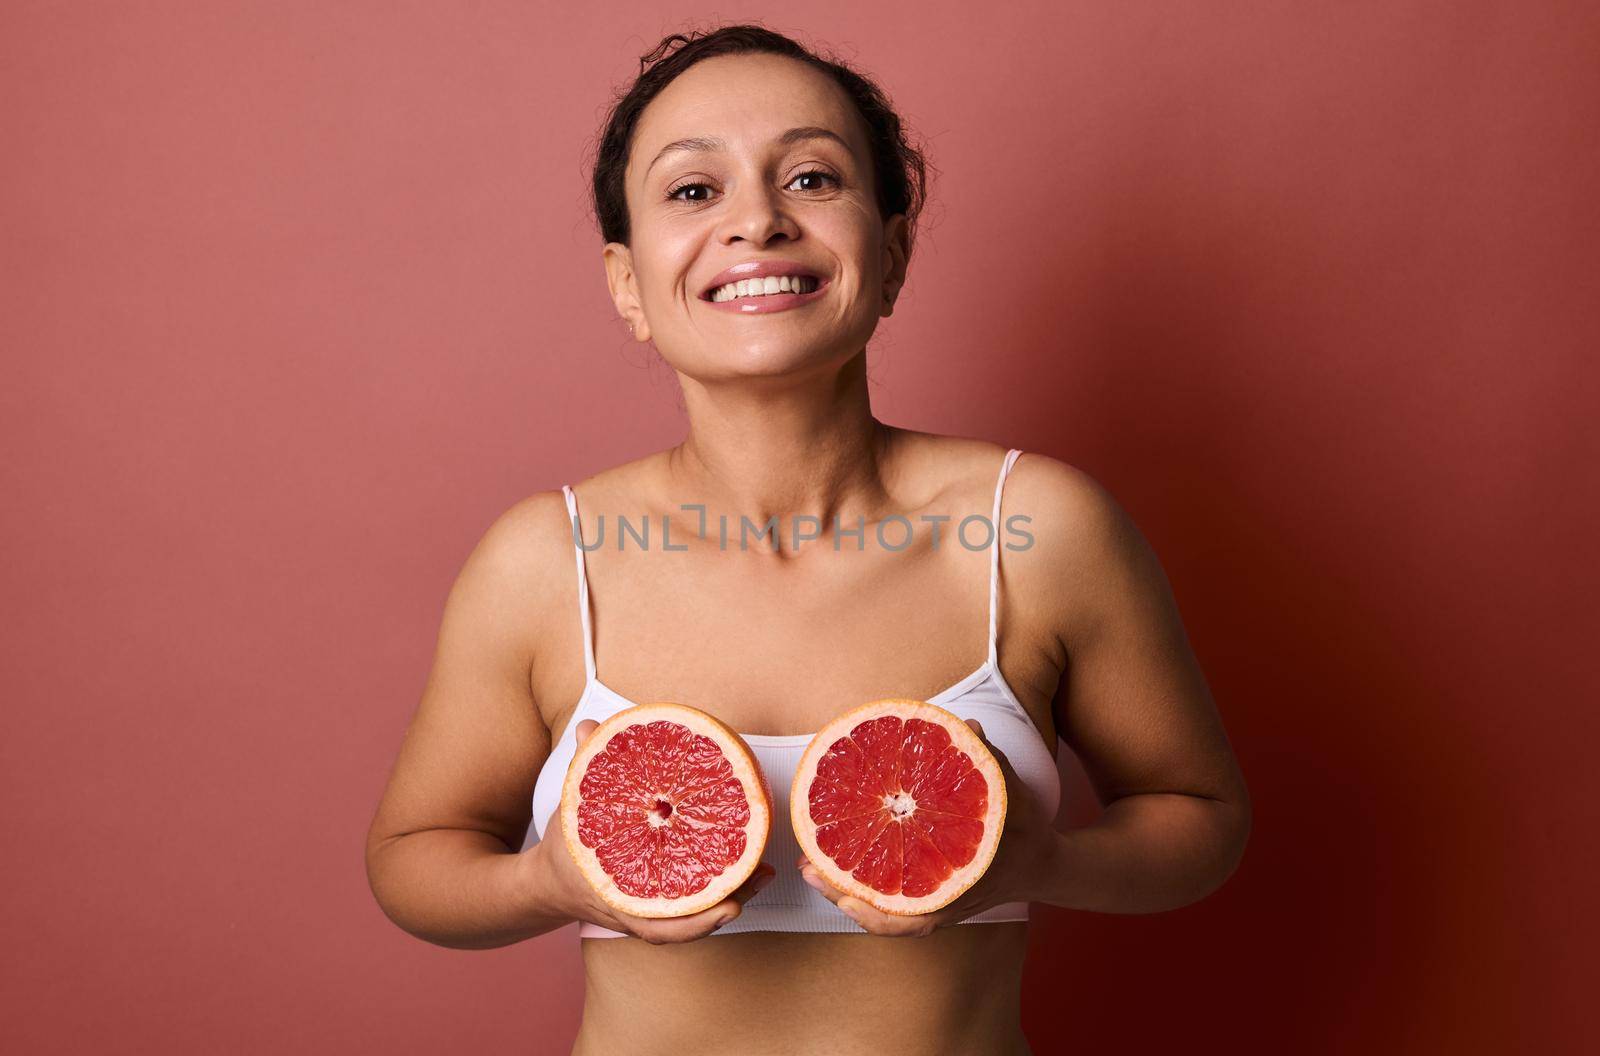 Beautiful woman in a white underwear holds grapefruits halves at chest level, smiling sweetly with a toothy smile posing on a coral background with space for text and advertising. Body and skin care by artgf